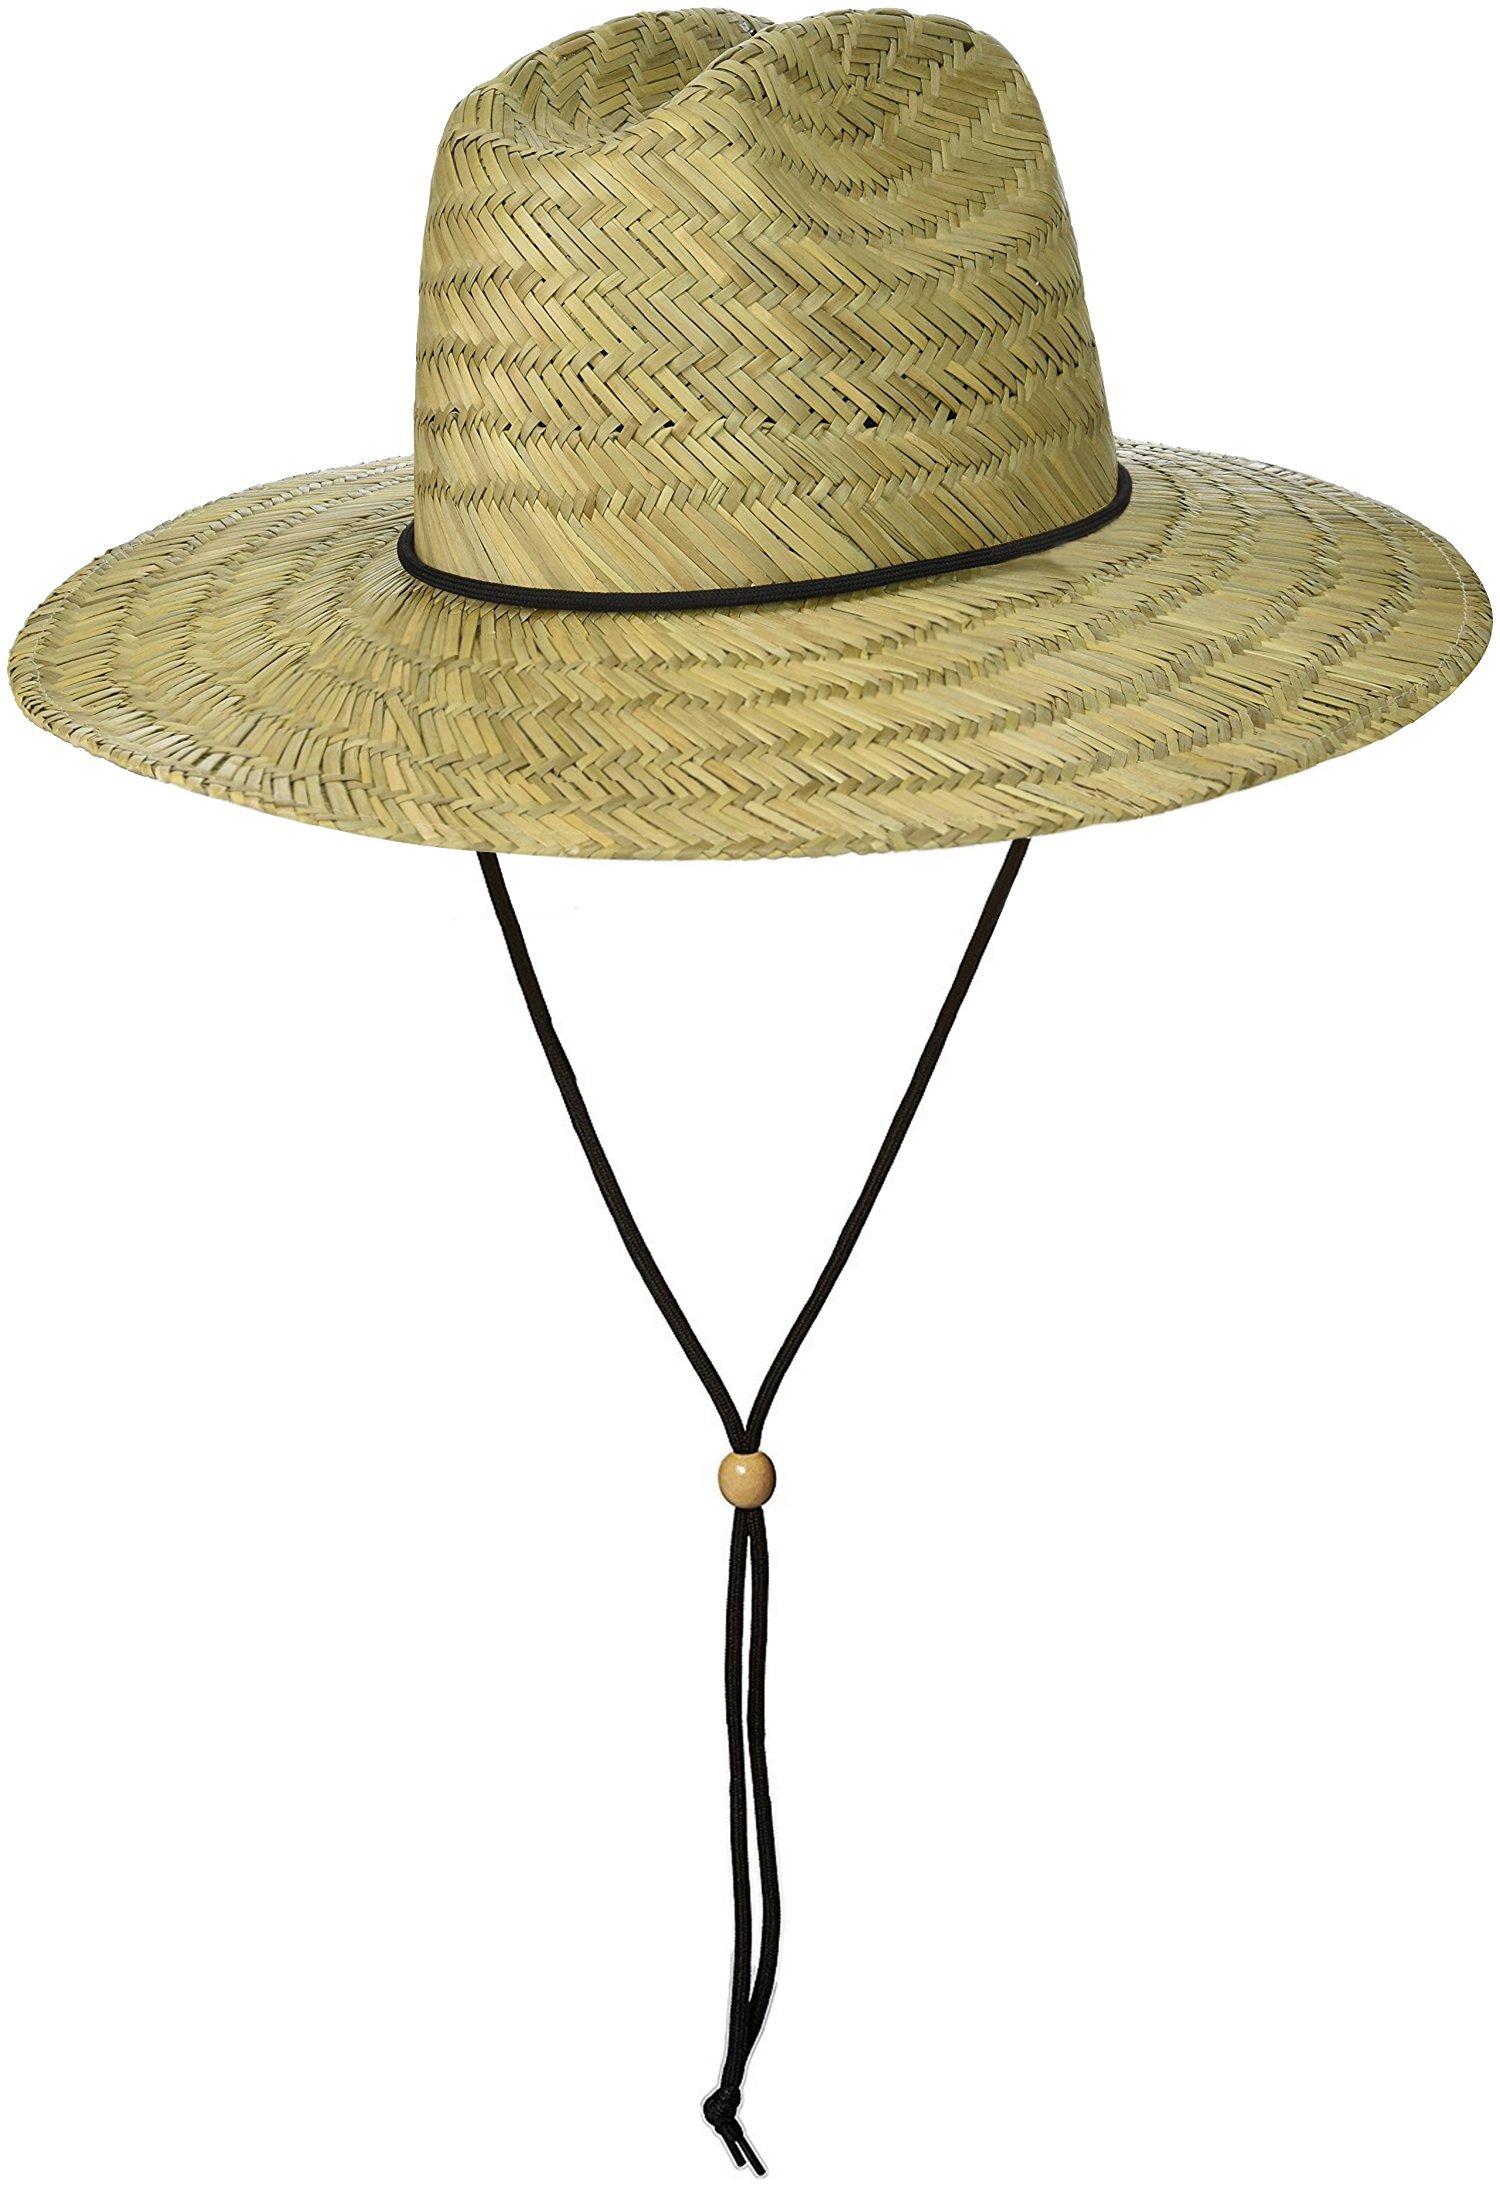 Mens straw hat sun protection classic wide-brimmed lifeguard sun straw hat UPF 50+ suitable for summer mens straw beach hat